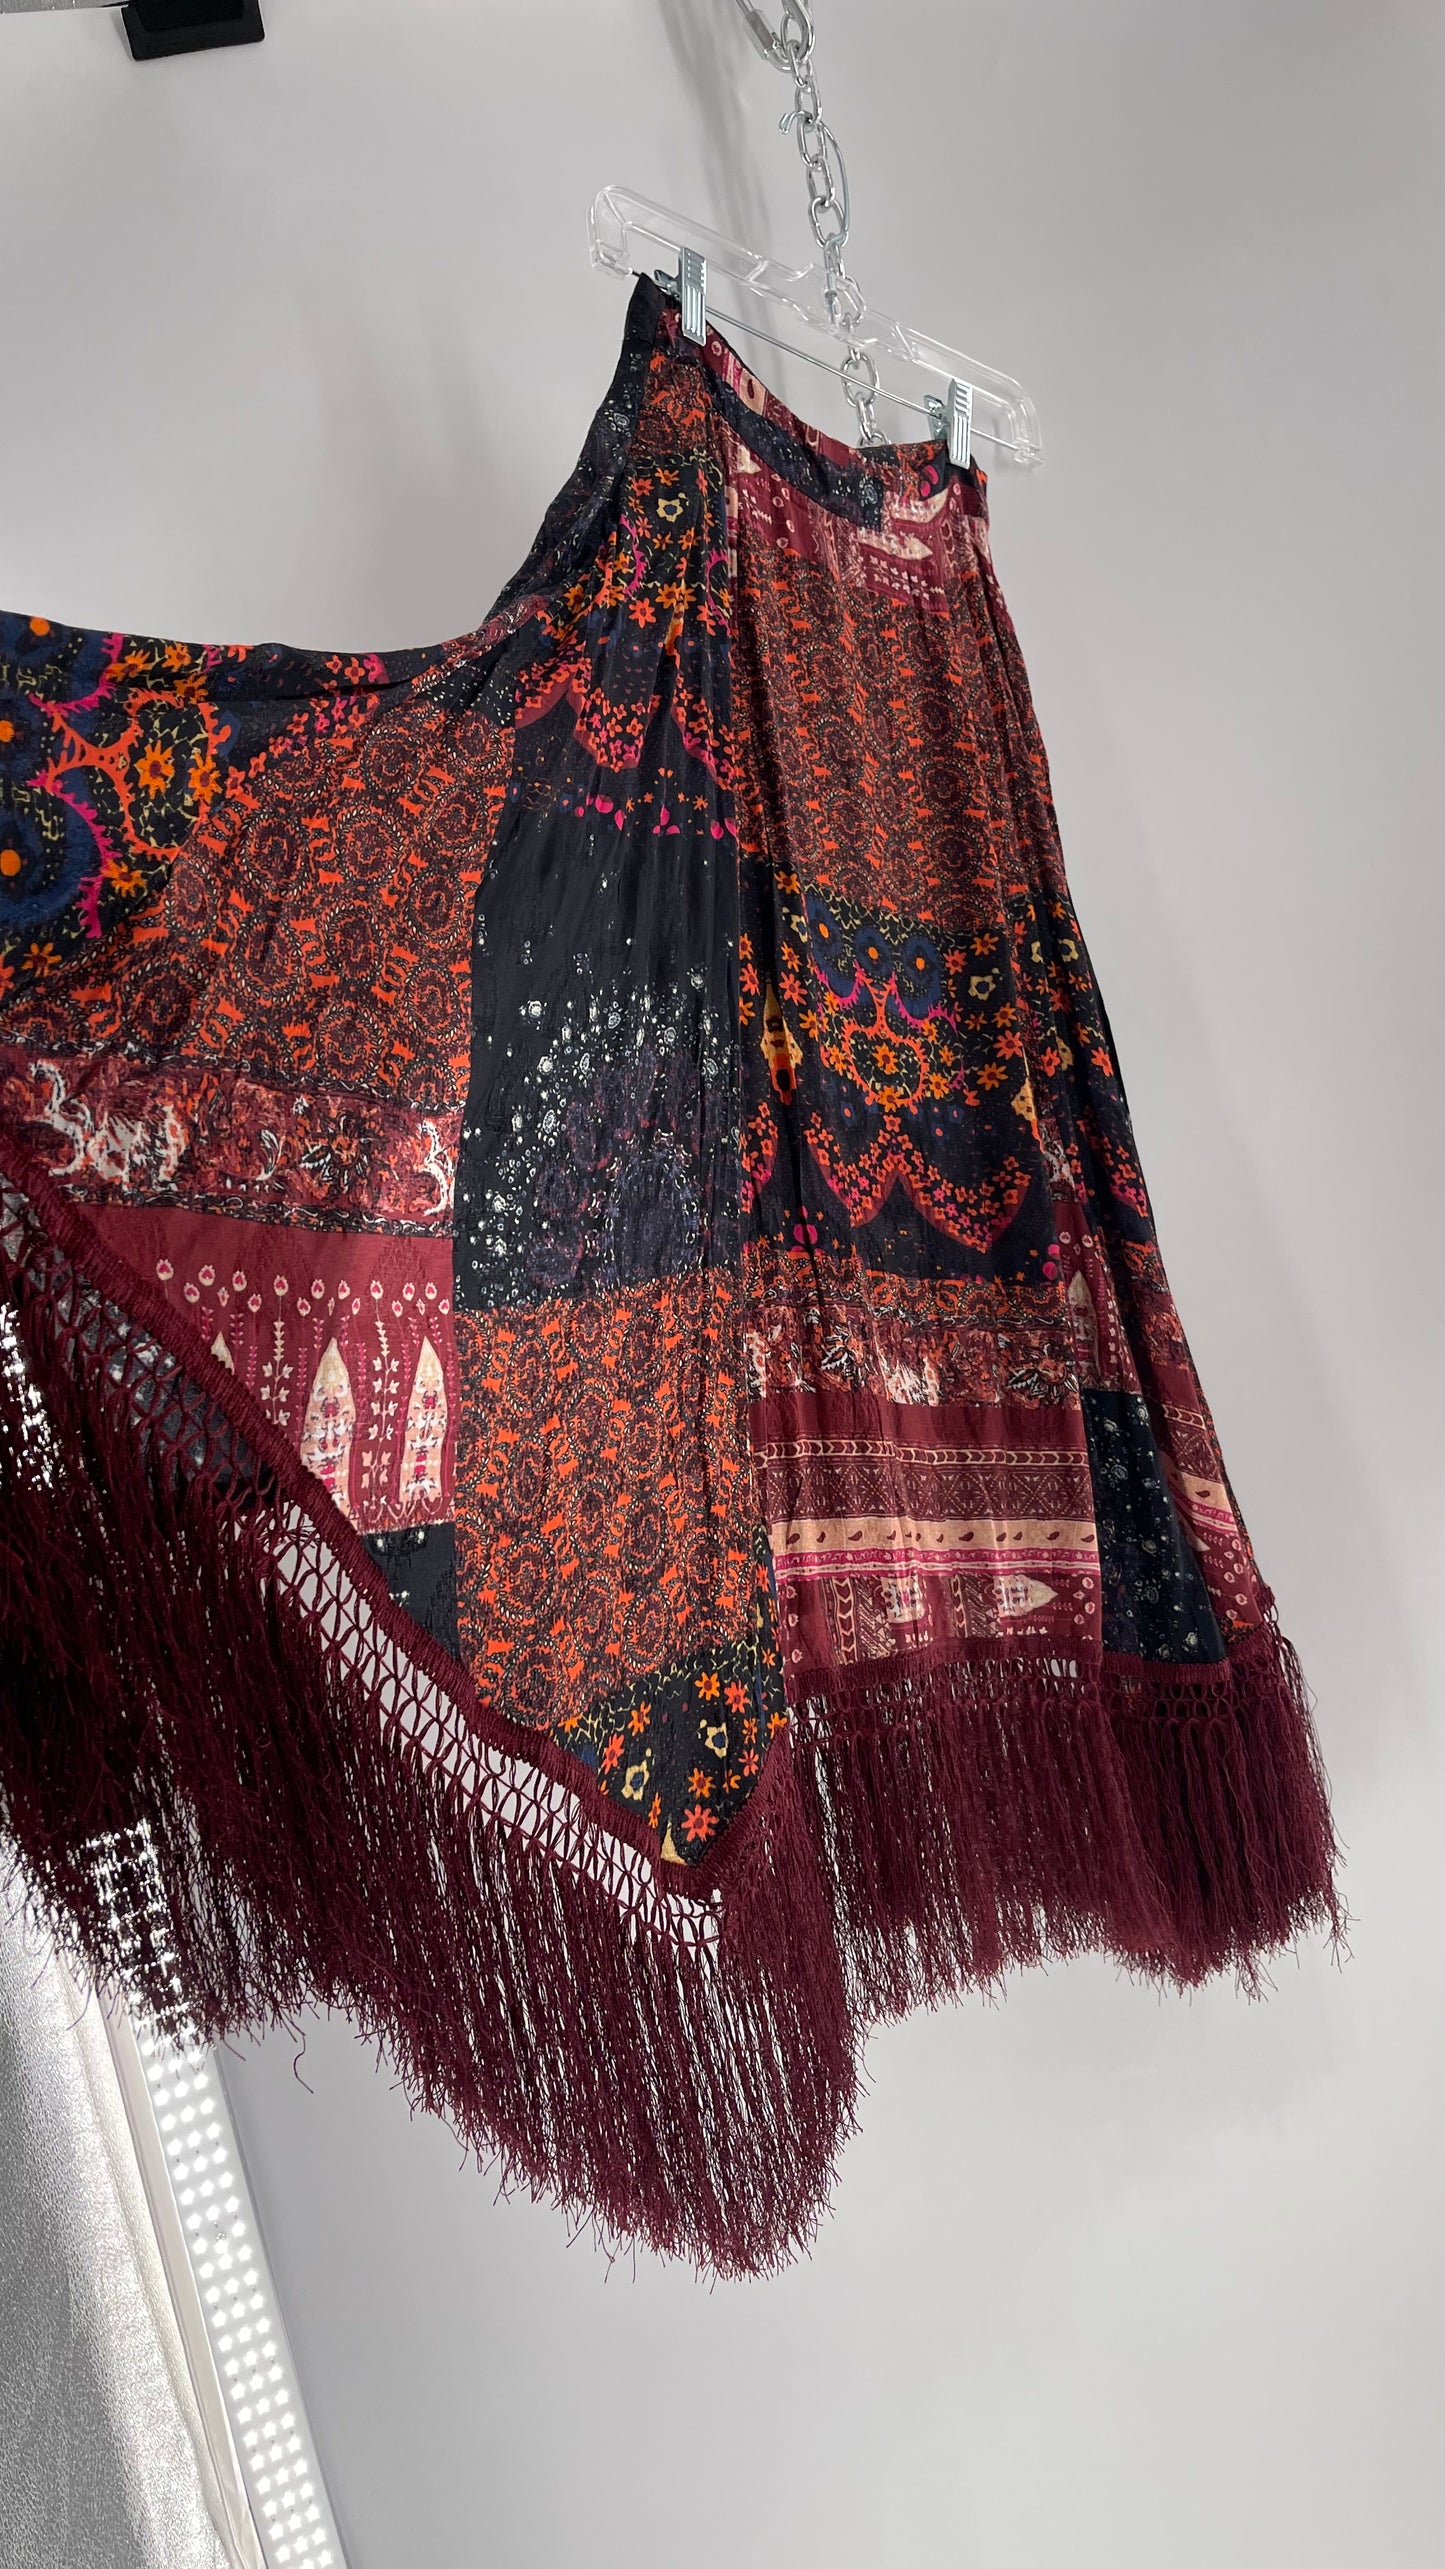 Free People Burgundy Satin Patchwork Patterned Fringe Full Length Skirt with Embossed Symbols and Side Slit Tags Attached (0)